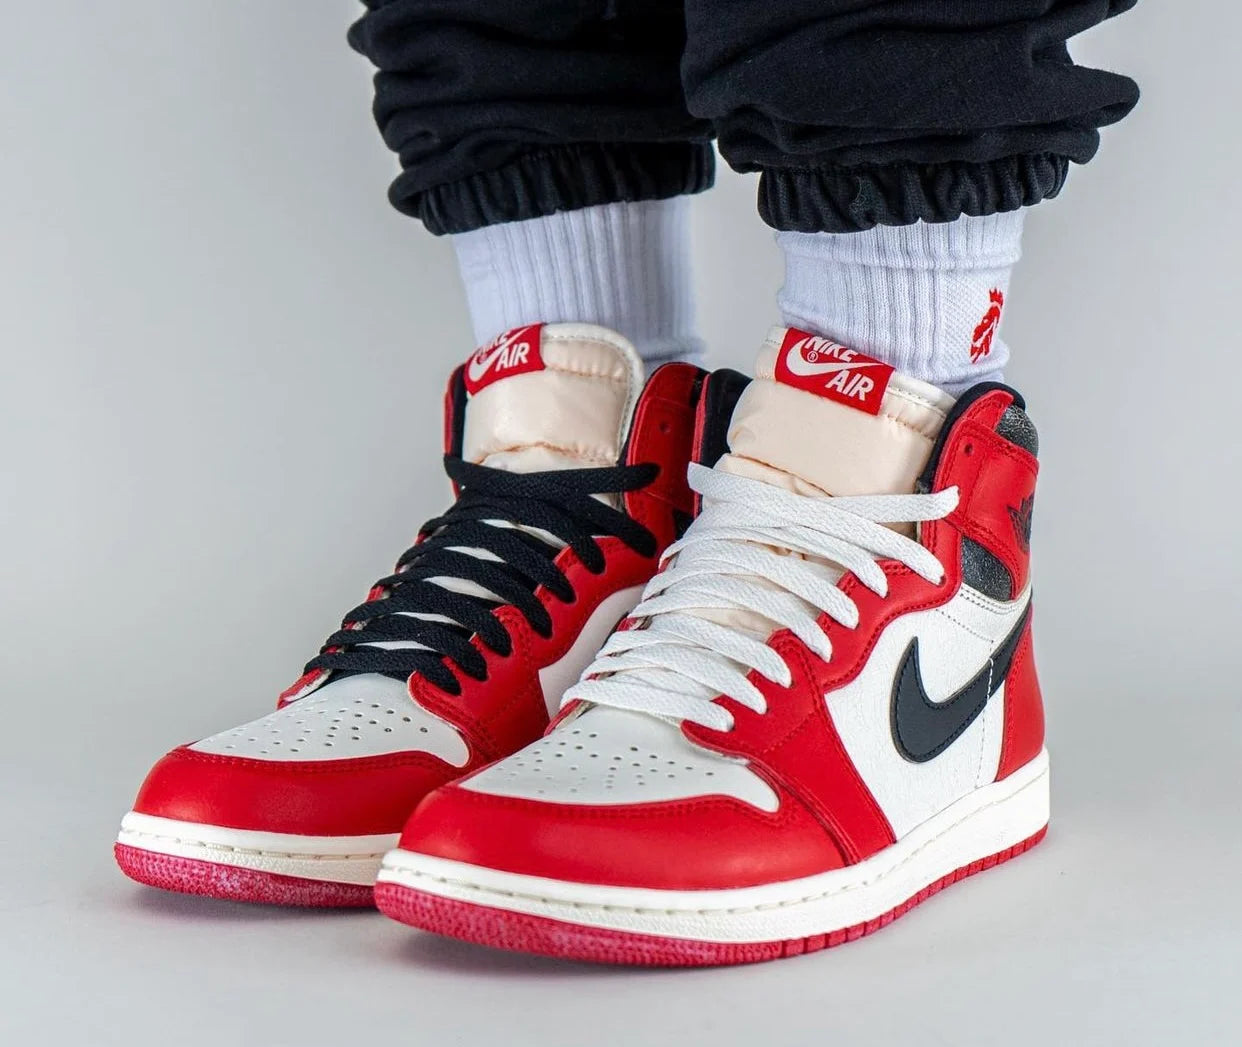 Air Jordan 1 Lost and Found Chicago 22 Release Date + First Look ...